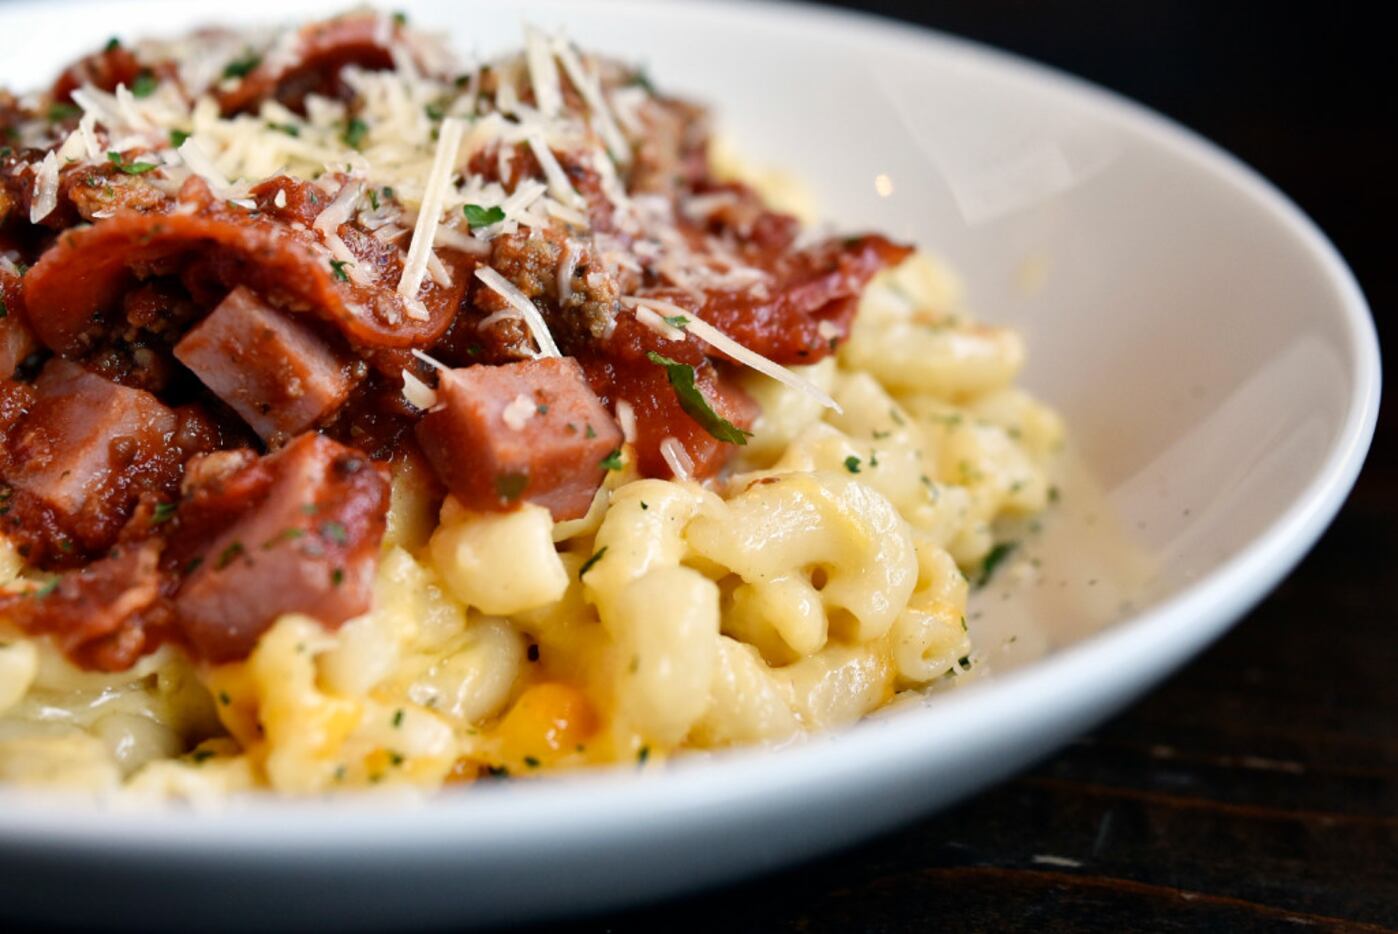 The Meat Lovers mac 'n cheese is loaded with bacon, ham, pepperoni, beef and marinara.